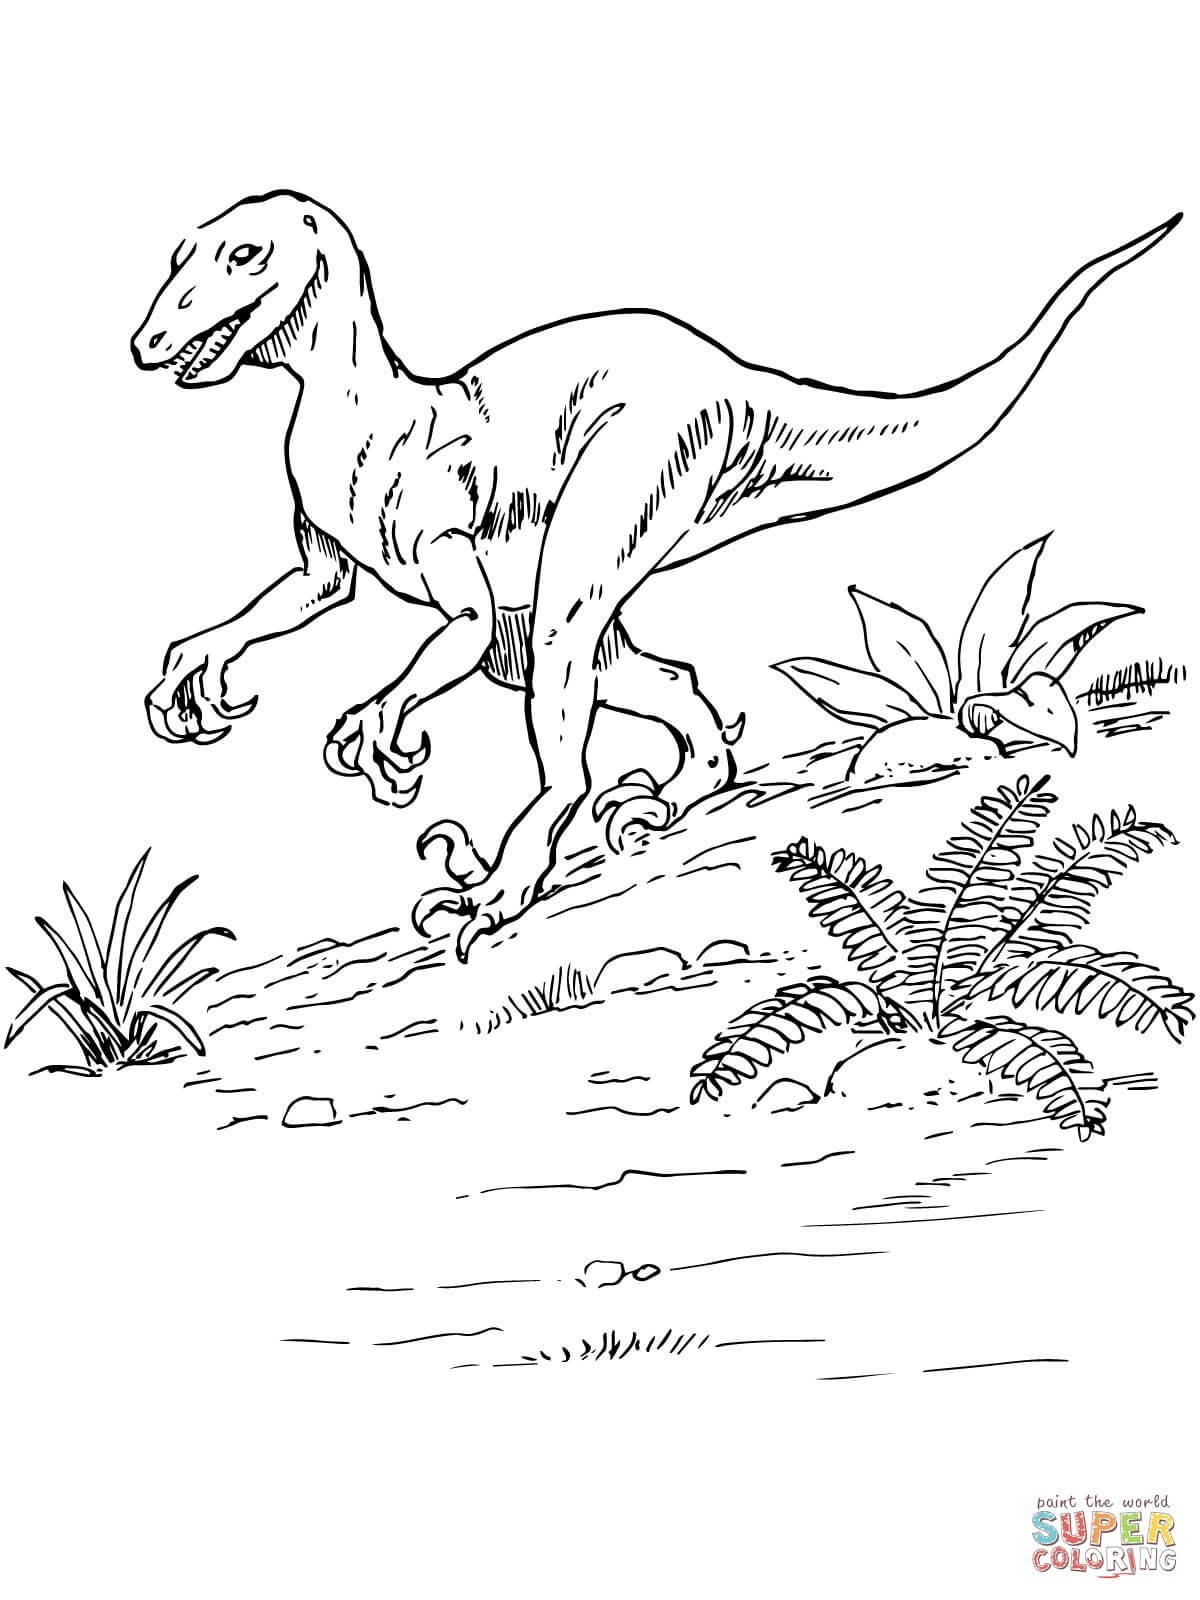 jurassic park raptor coloring pages fresh printable coloring pages decorative troodon coloring page th